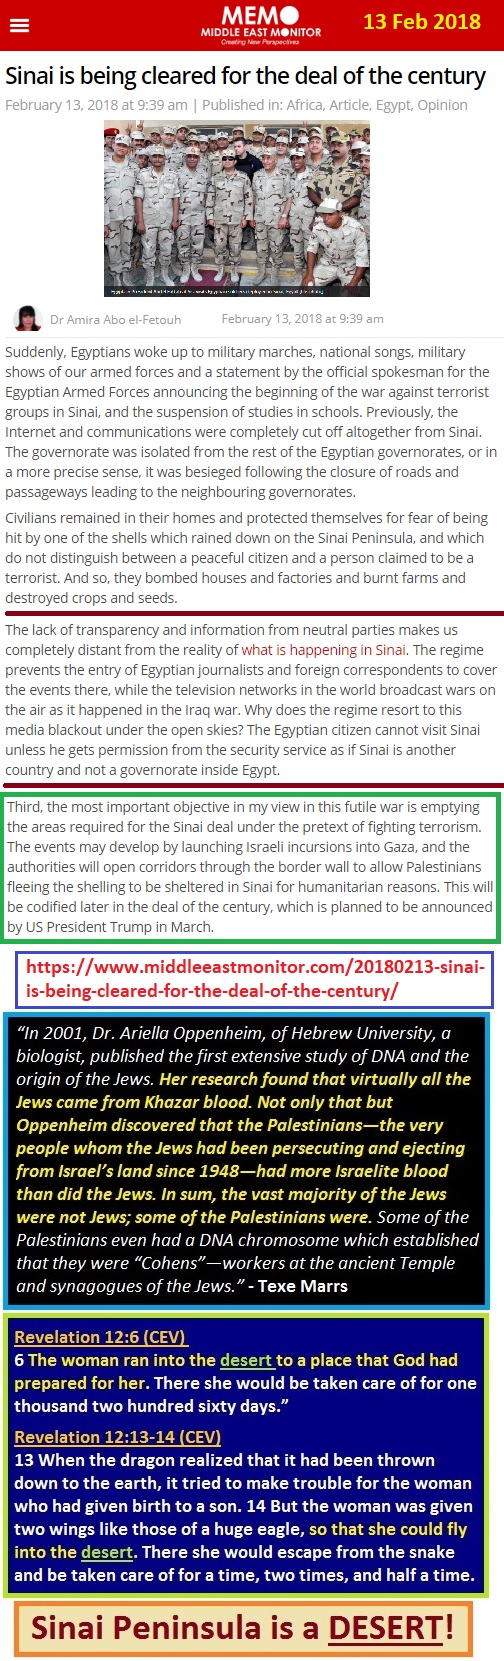 https://www.middleeastmonitor.com/20180213-sinai-is-being-cleared-for-the-deal-of-the-century/